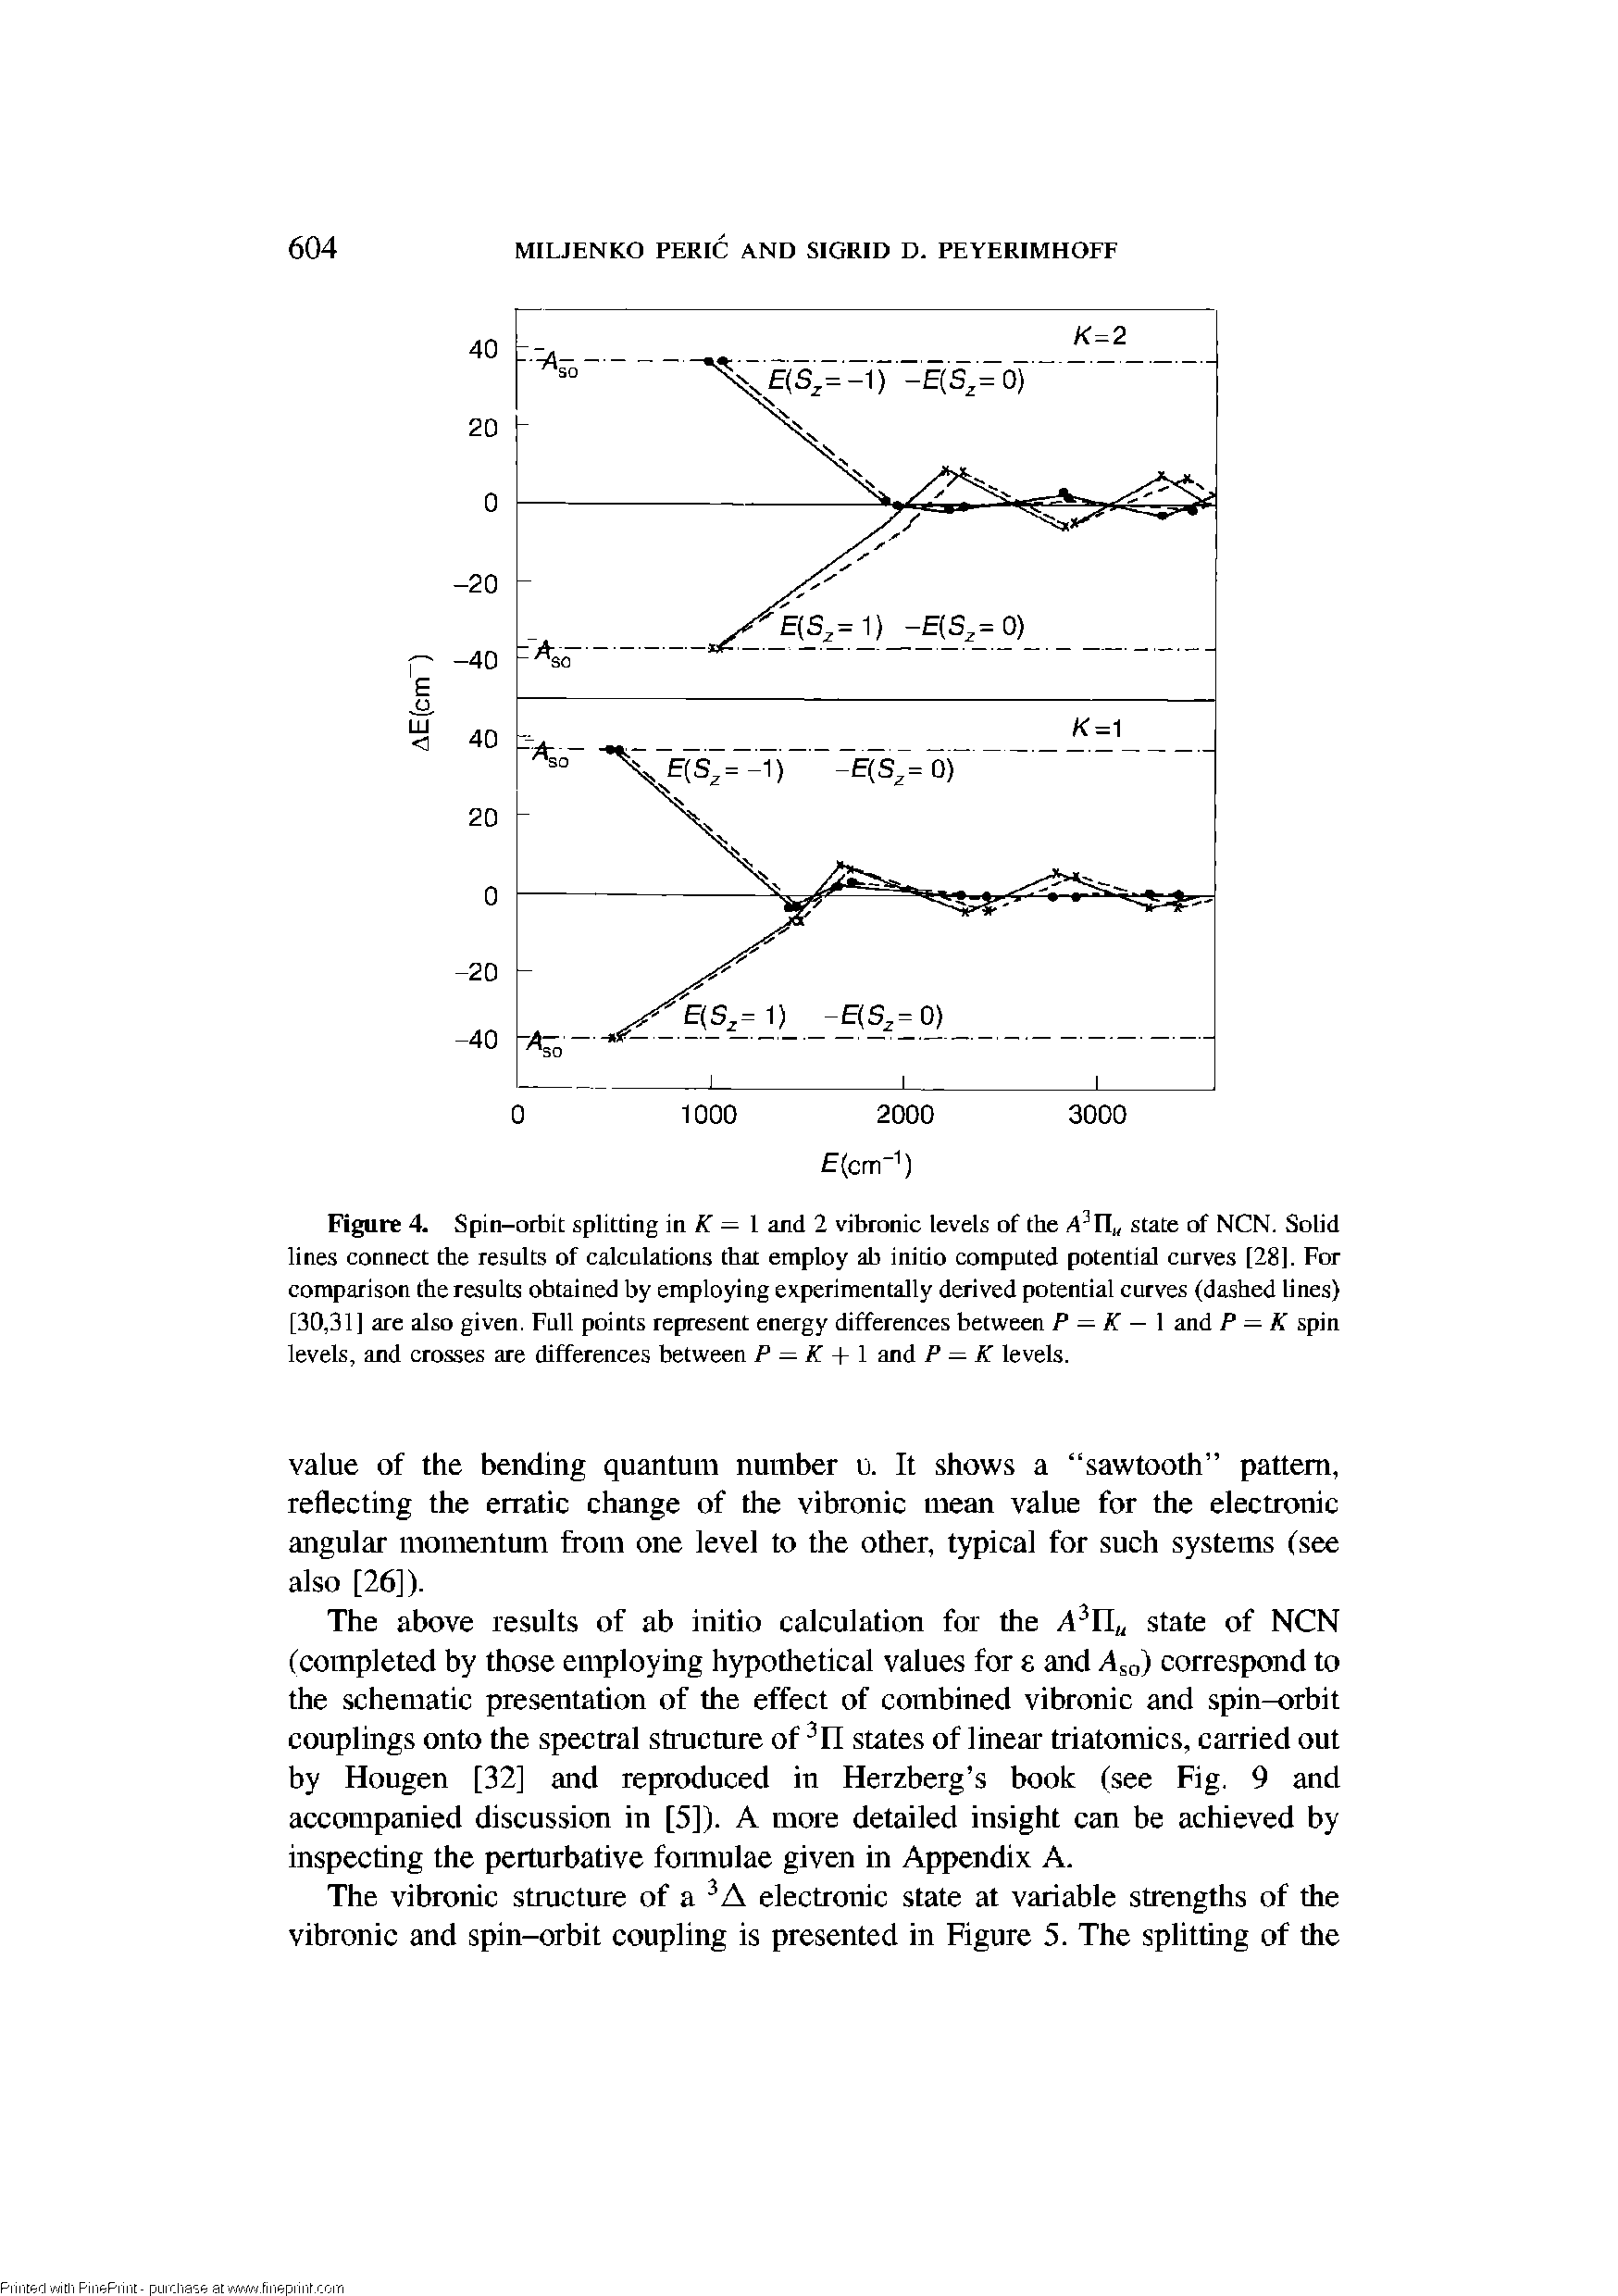 Figure 4. Spin-orbit splitting in AT — 1 and 2 vibronic levels of the state of NCN. Solid lines connect the results of calculations thar employ ab initio computed potential curves [28], For comparison the results obtained by employing experimentally derived potential curves (dashed lines) [30,31] are also given. Full points represent energy differences between P — K — and P — K spin levels, and crosses are differences between P — K + I and P — K levels.